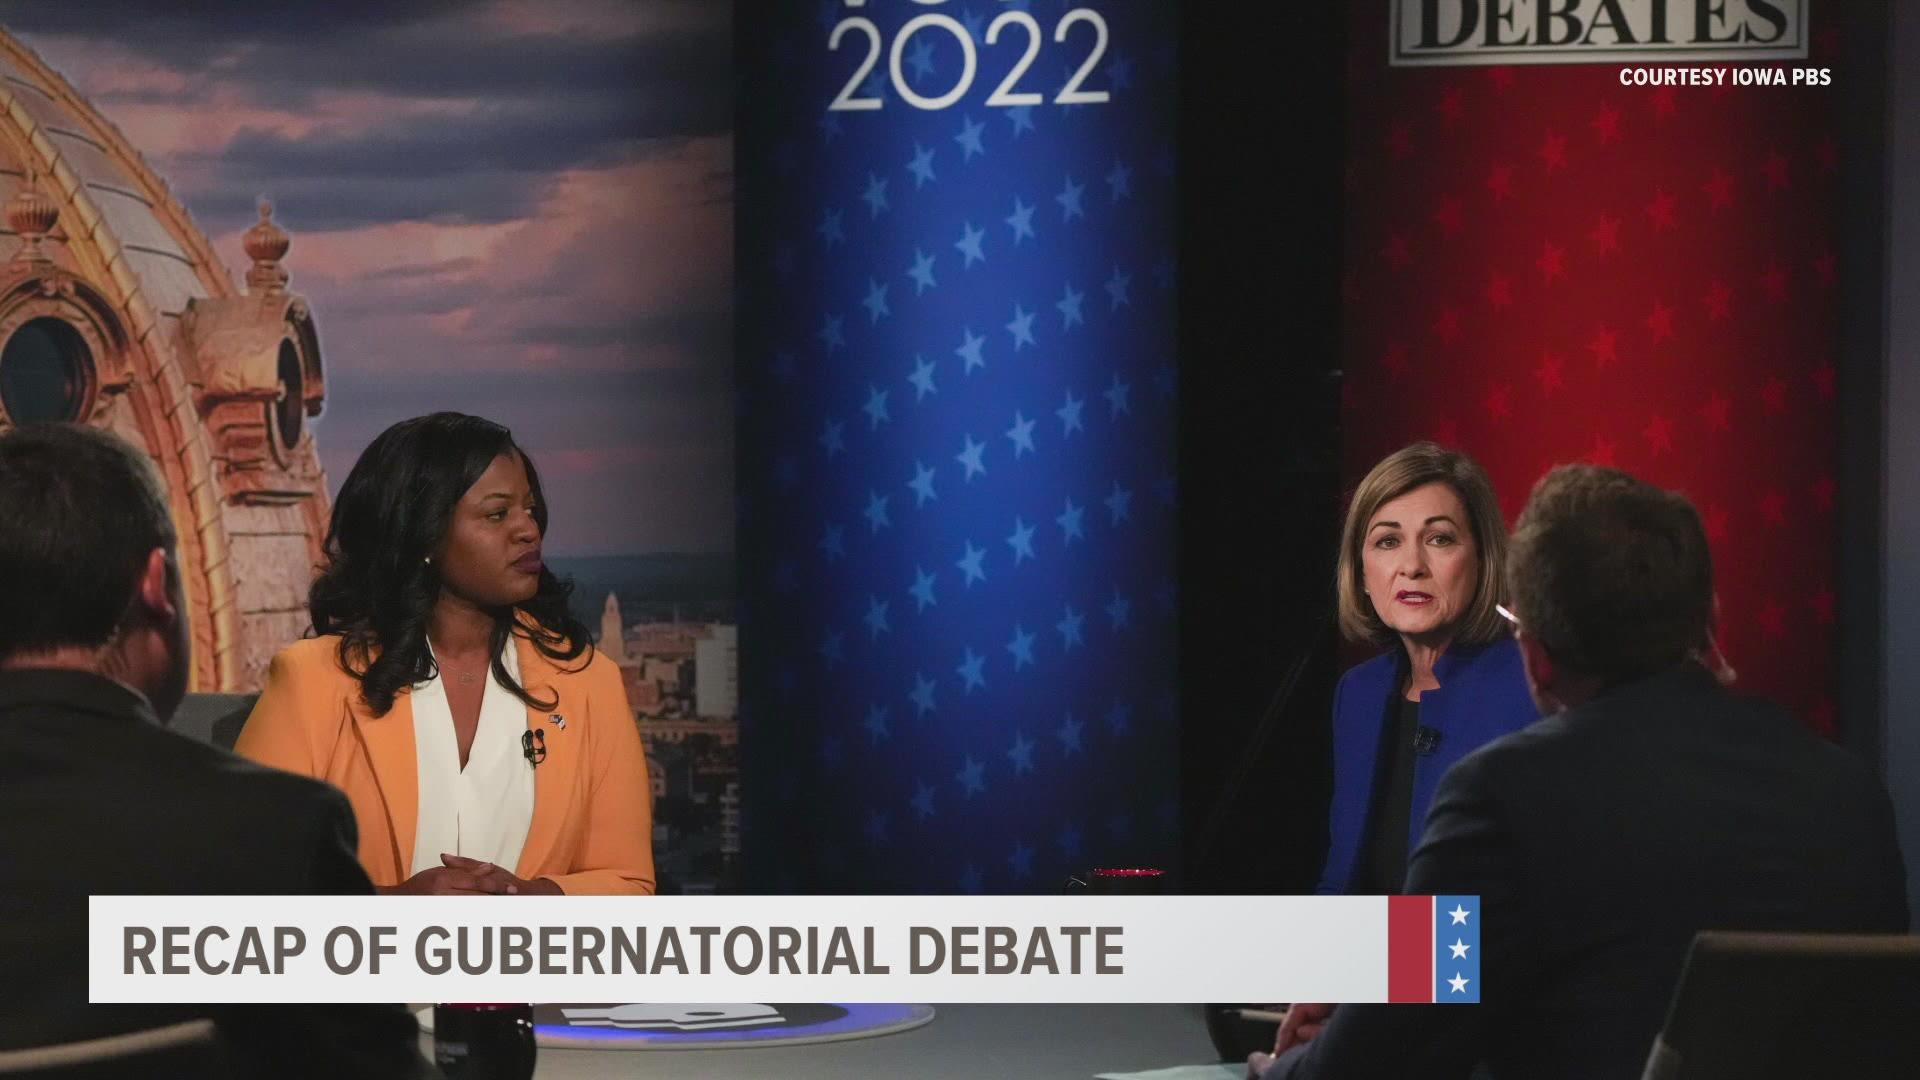 During the debate on Monday, candidates Kim Reynolds and Deidre DeJear hit hard on two topics: taxes and abortion.